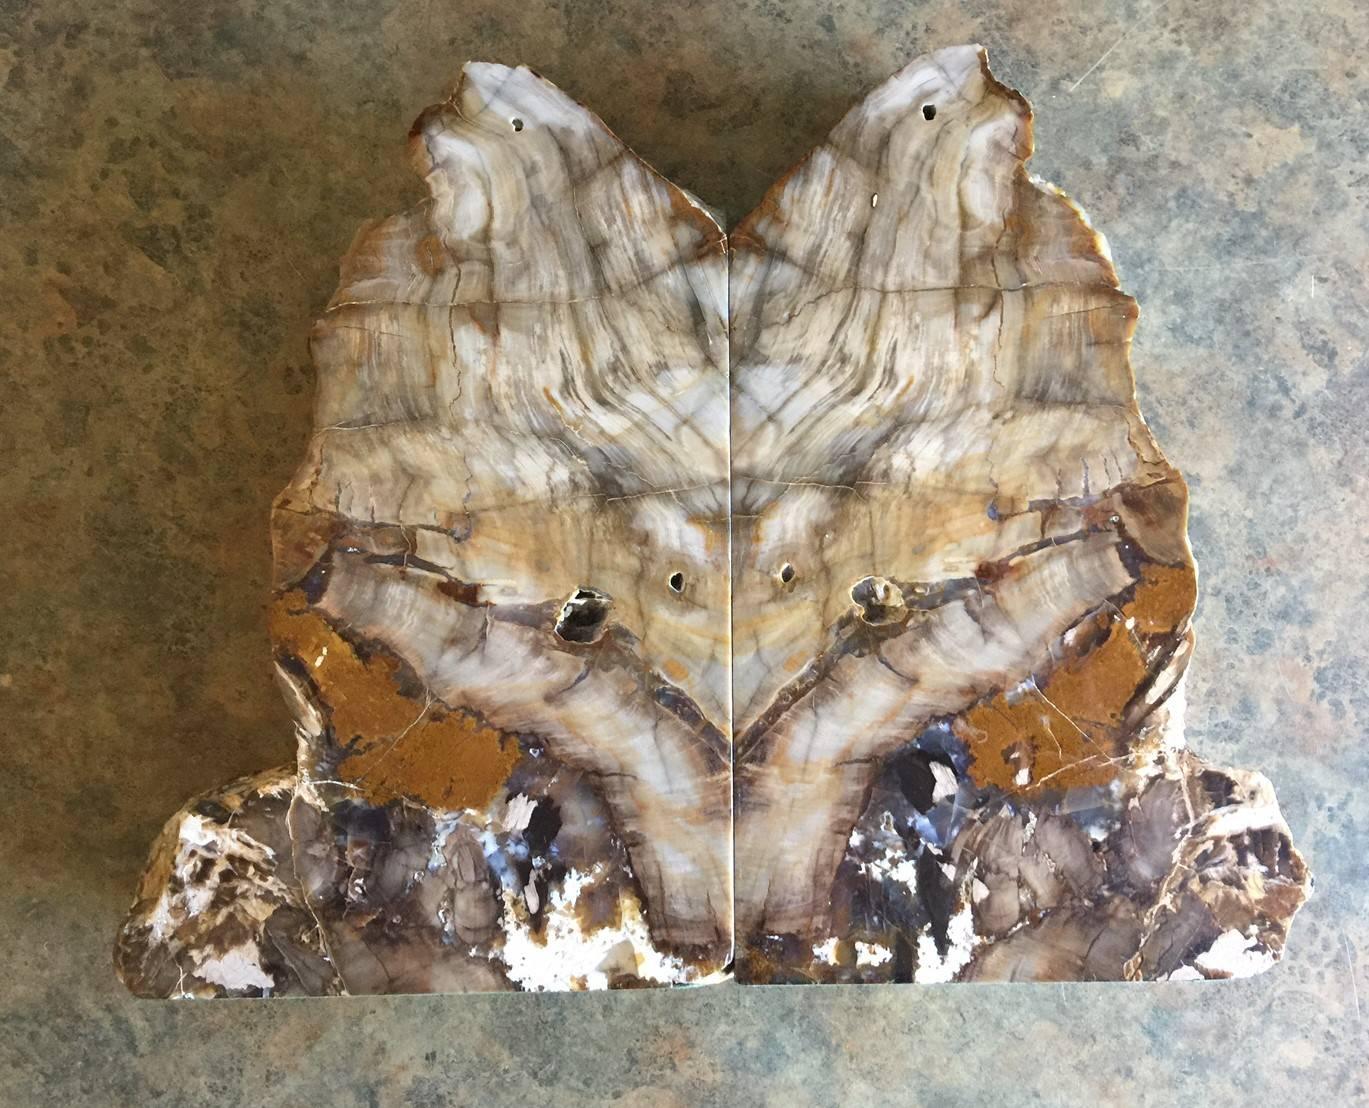 A massive pair of fossilized bookends composed of petrified wood. Brightly colored tan and brown tones with naturally formed patterns caused by fossilization over millions of years. Finished with a highly polished surface, the exterior edges